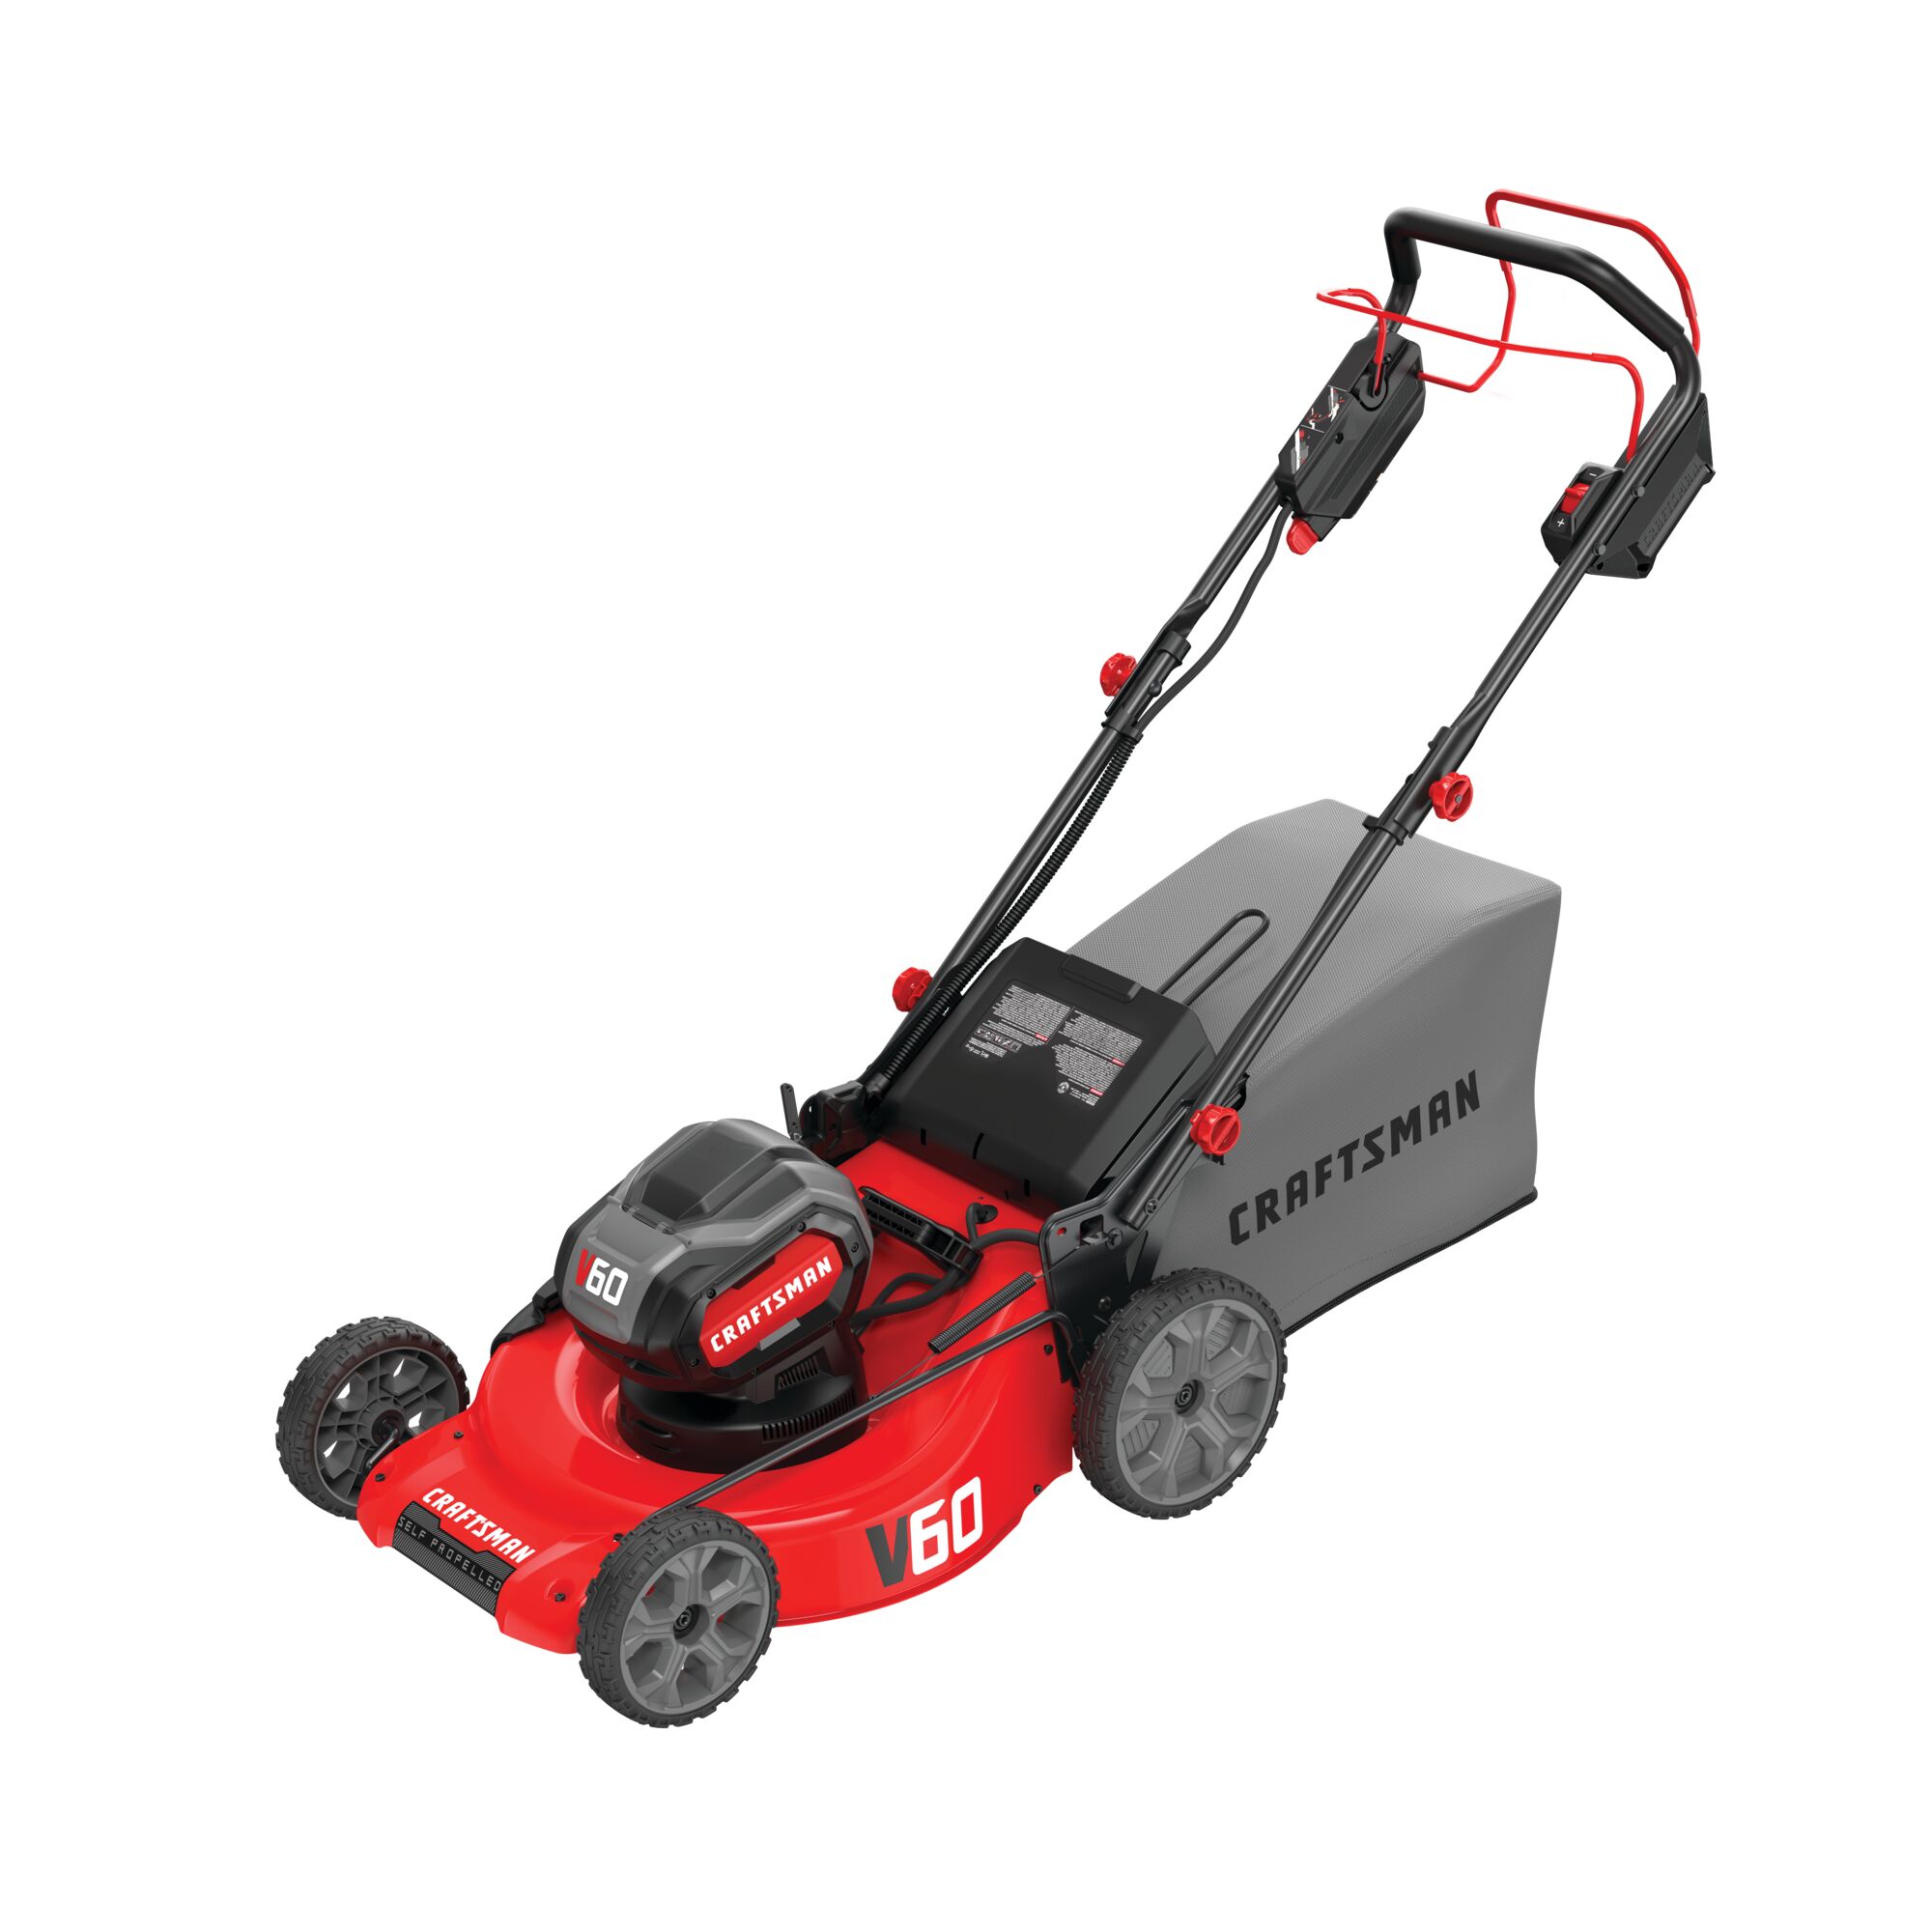 Volt 60 cordless 21 inch 3 in 1 self propelled lawn mower kit 7.5 Amp hour.